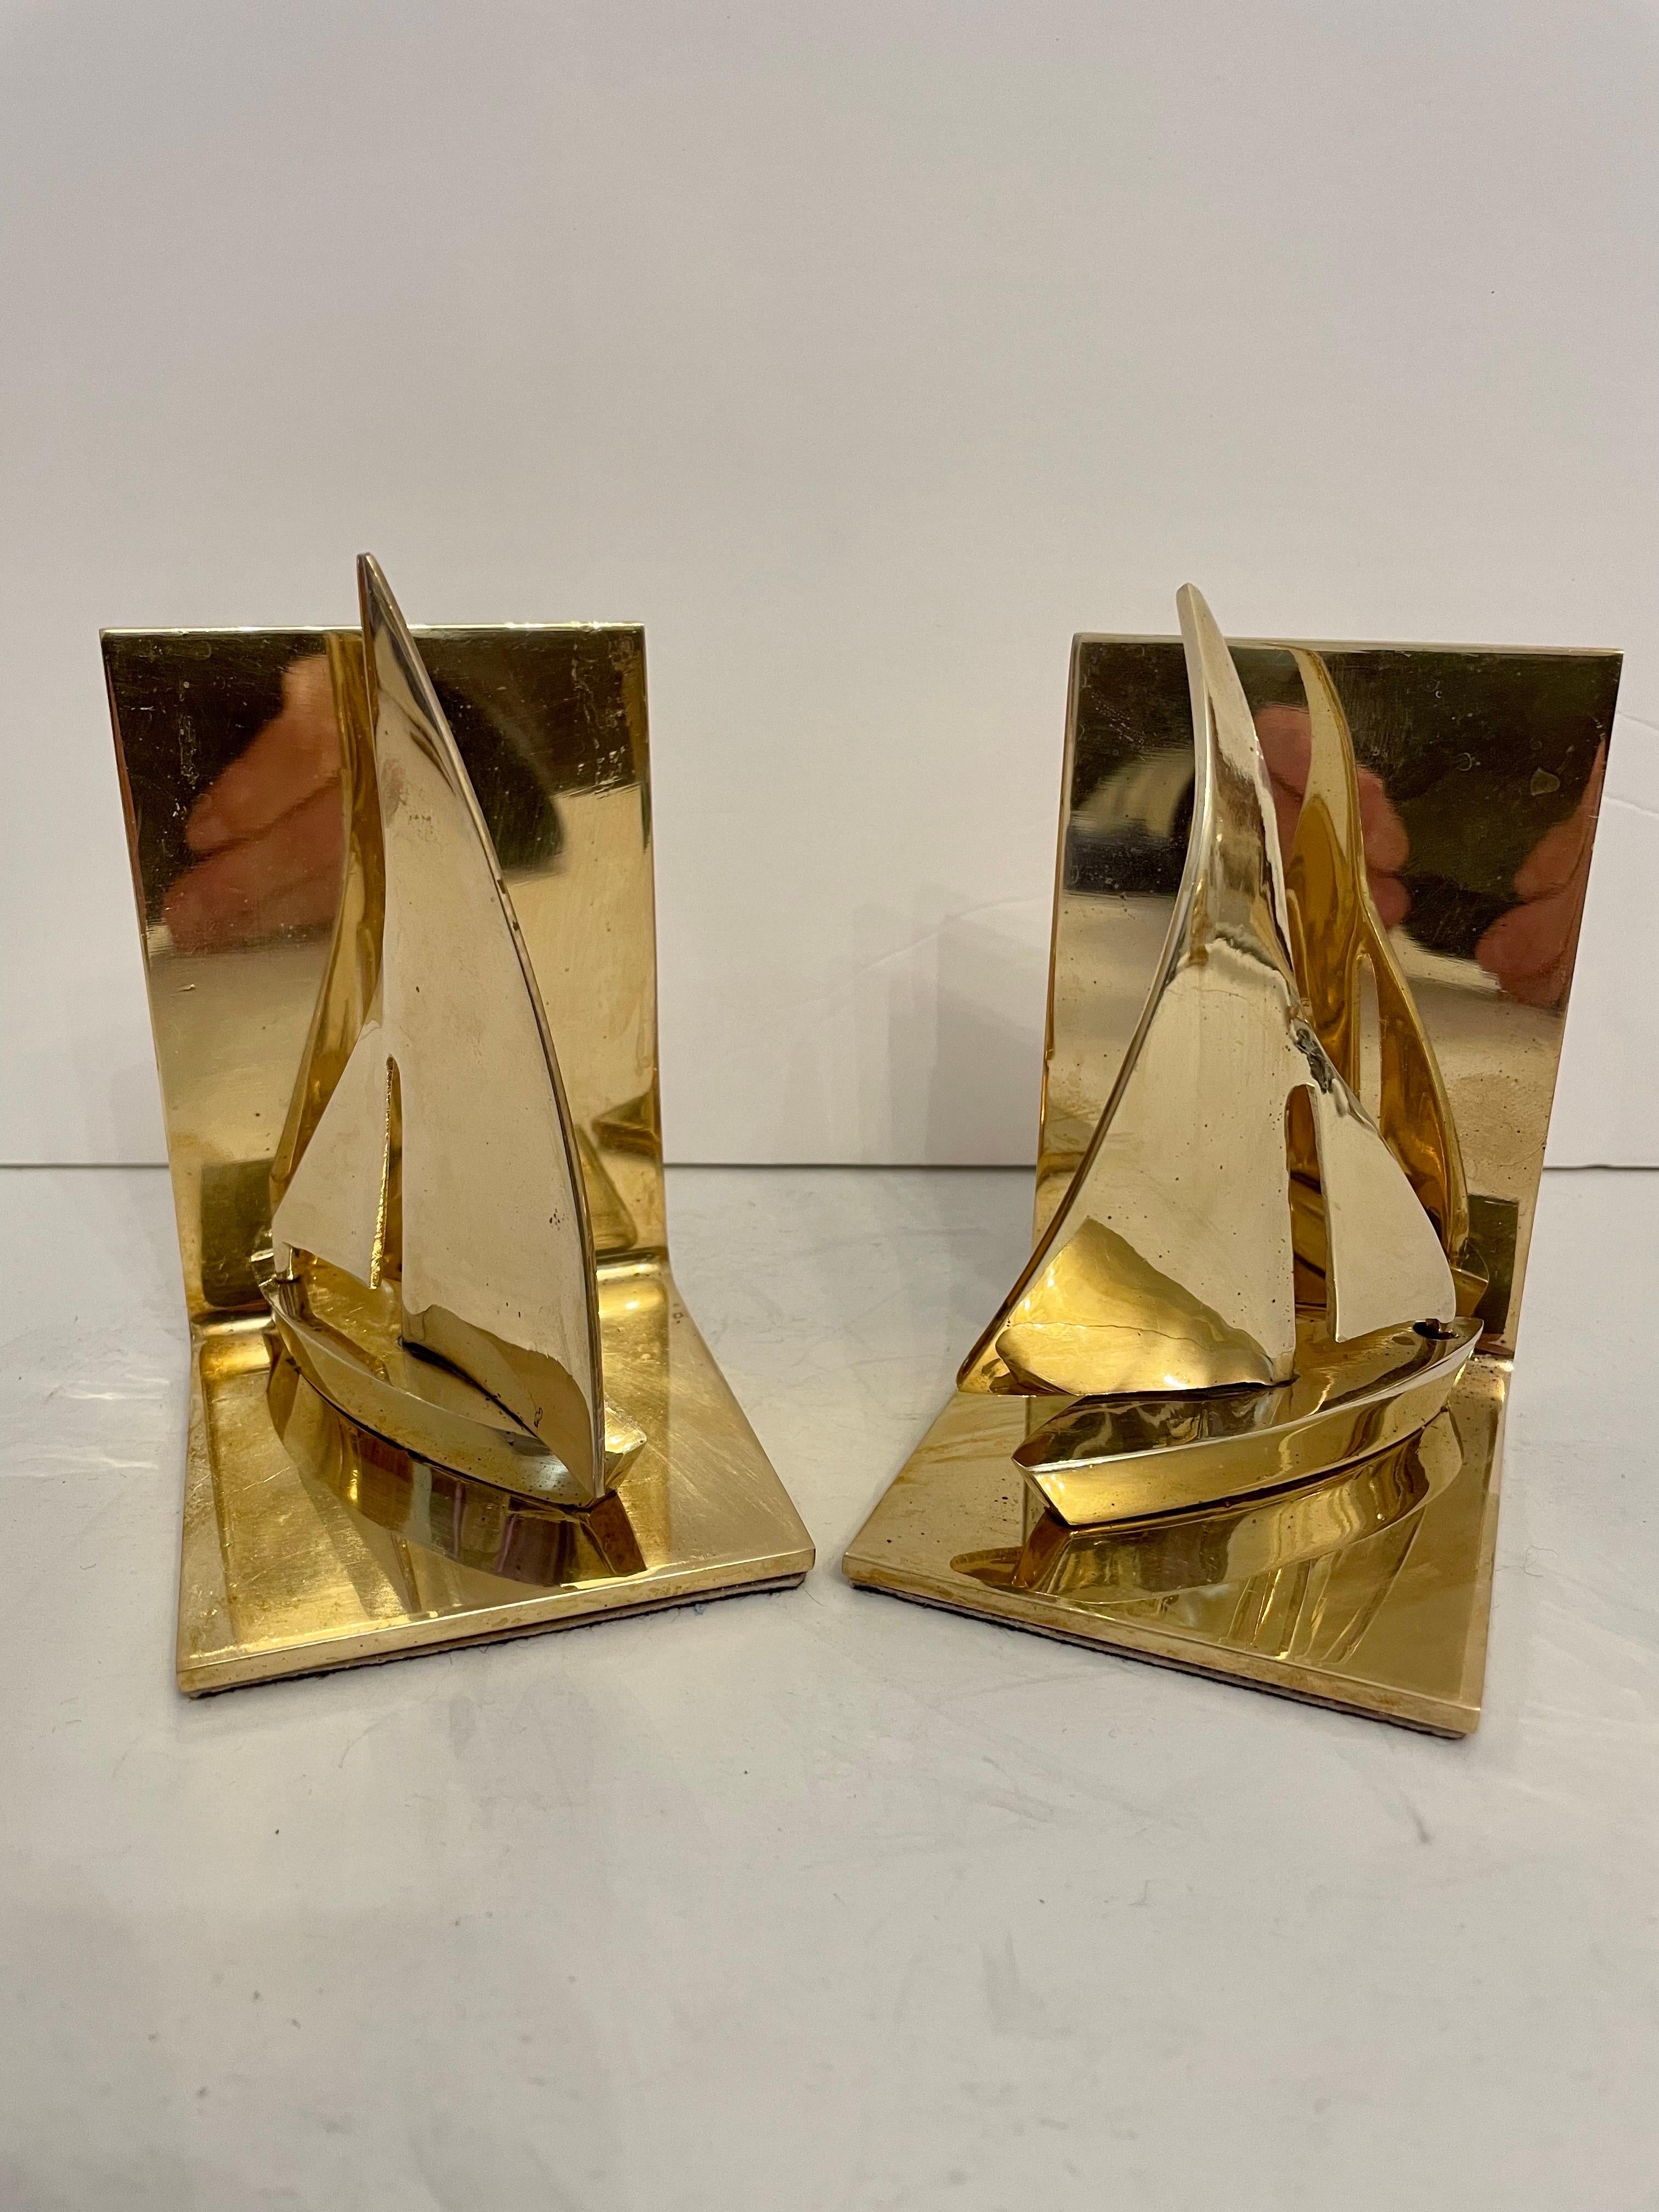 Brass Sailboat bookends. Nice detail in casting, heavy weight with substantial feel. Holds a shelves worth of books. Good condition, some slight patina. Thin pad on bottom to protect surfaces. Any dark or light spots are reflection only. Great for